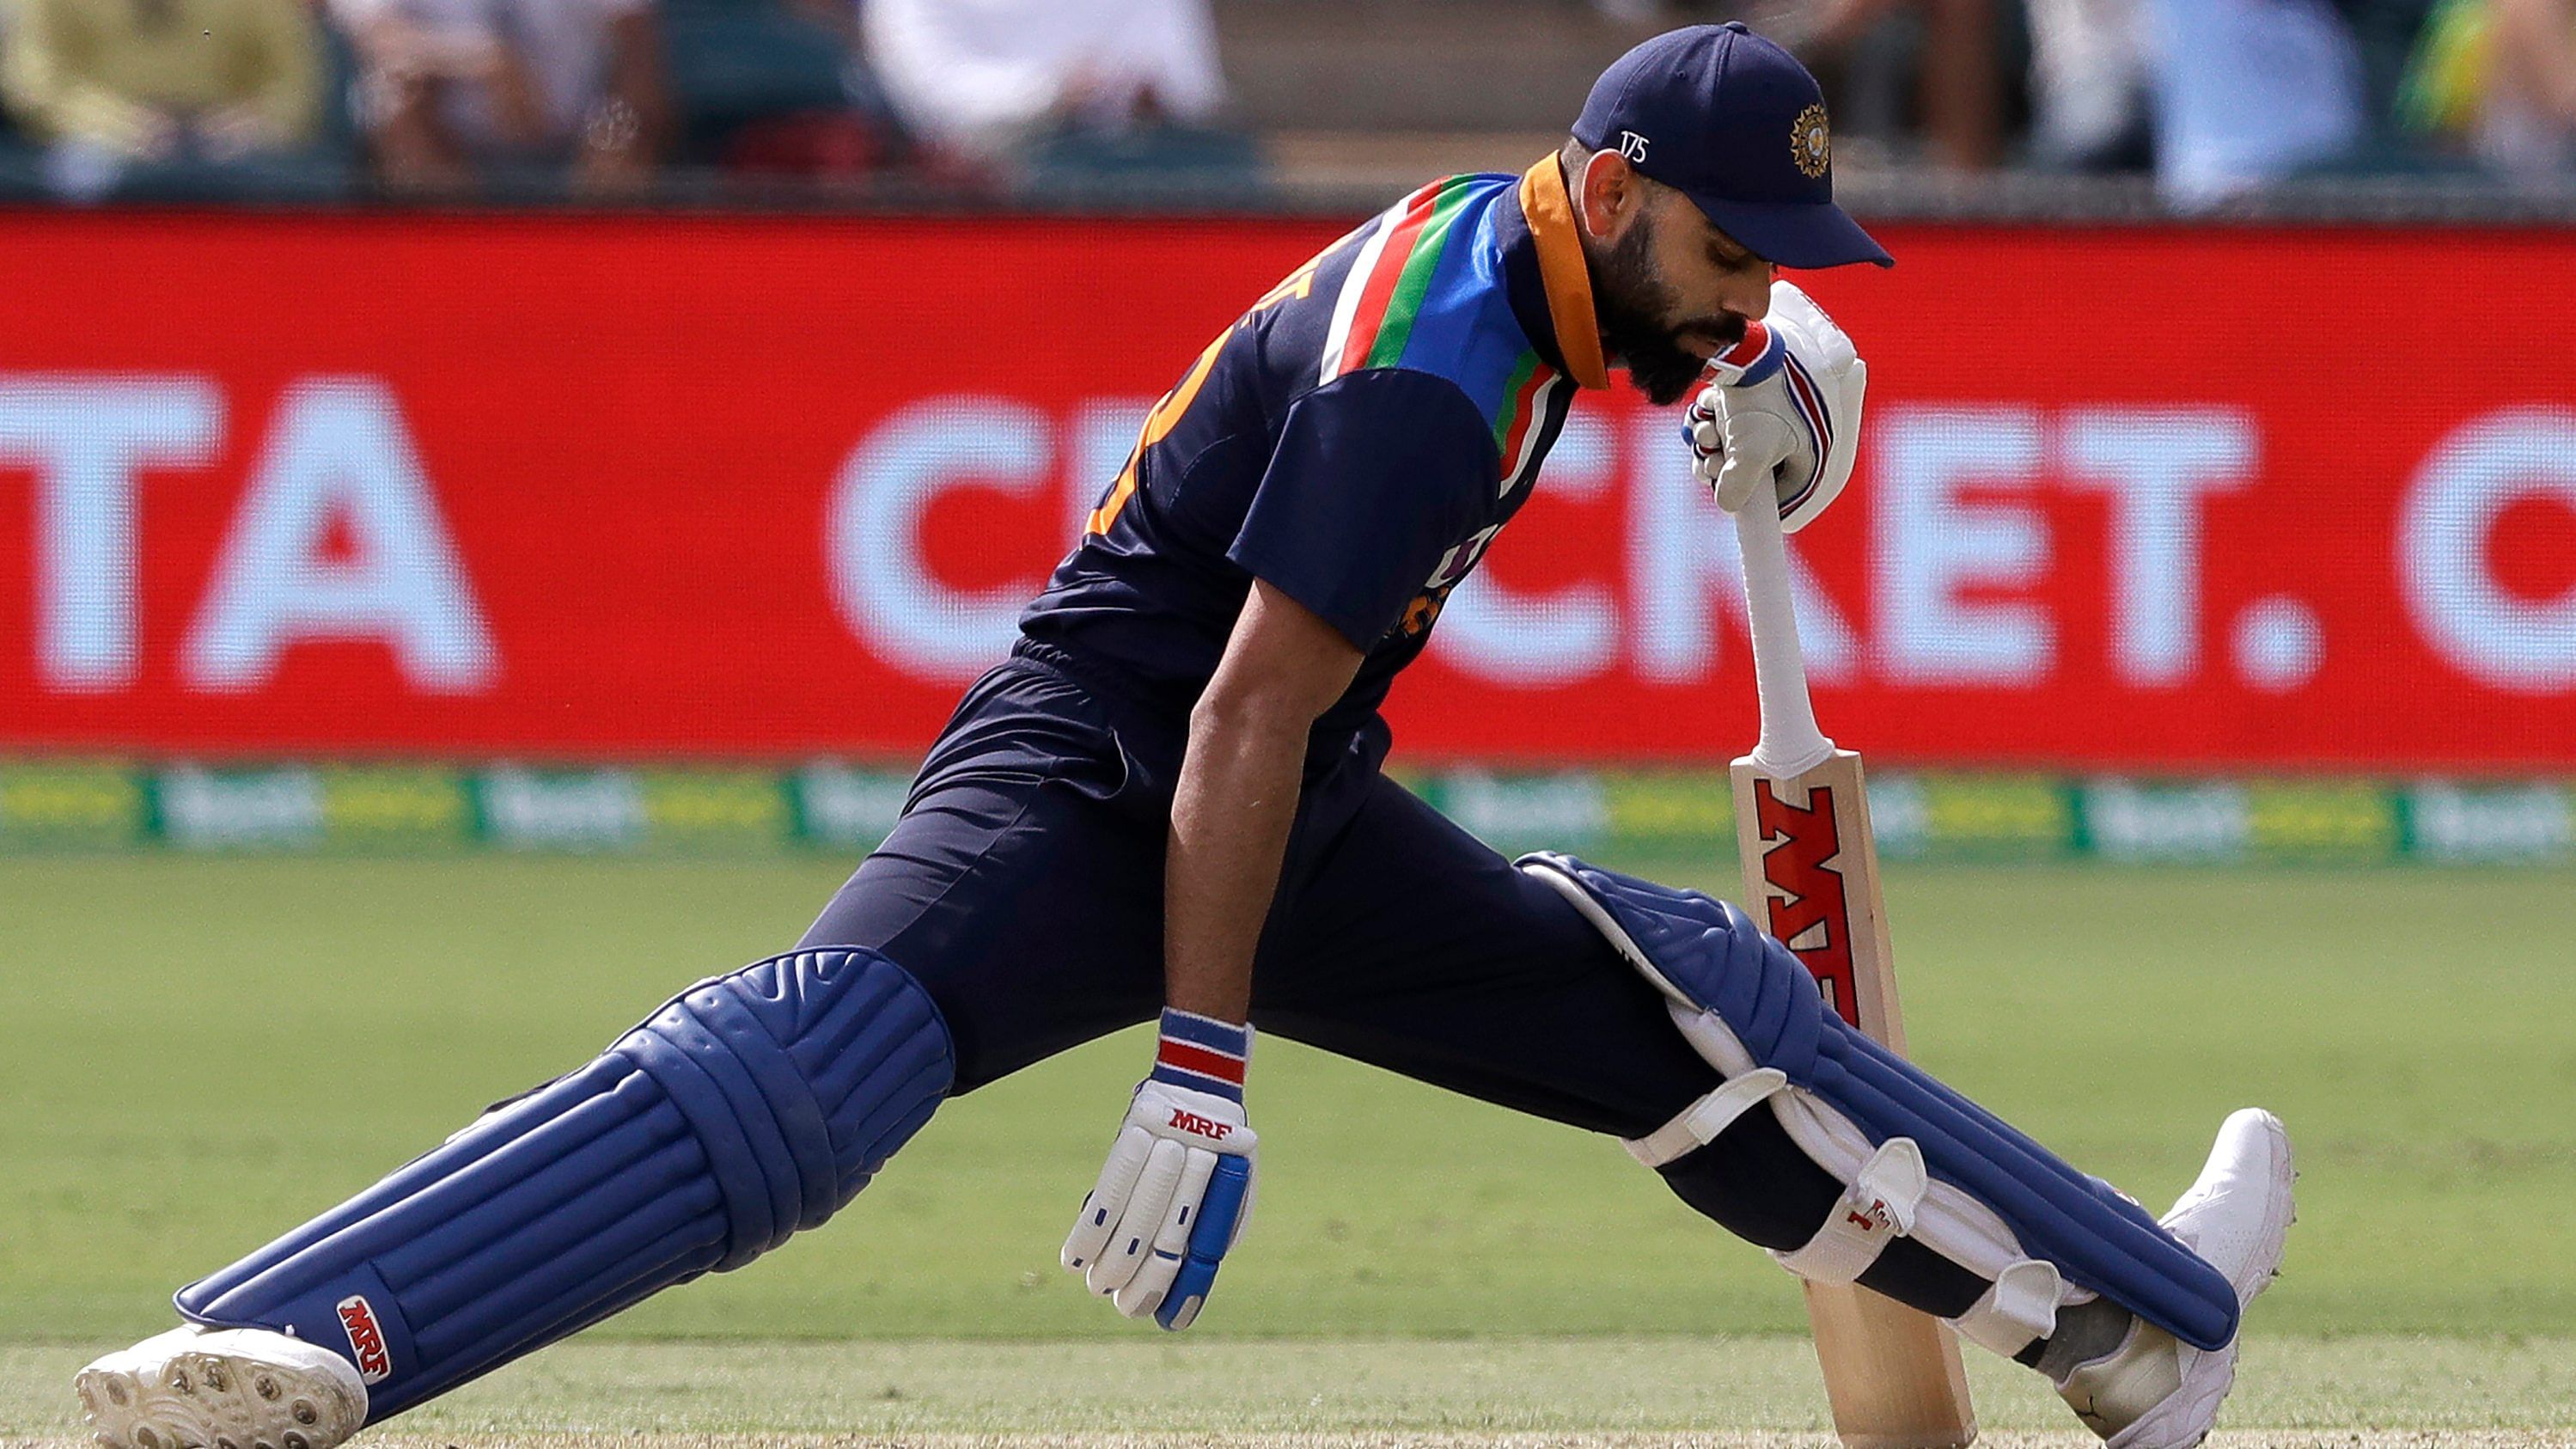 Virat Kohli stretches his legs while batting against Australia during their one day international cricket match at Manuka Oval in Canberra. Credit: AP File Photo